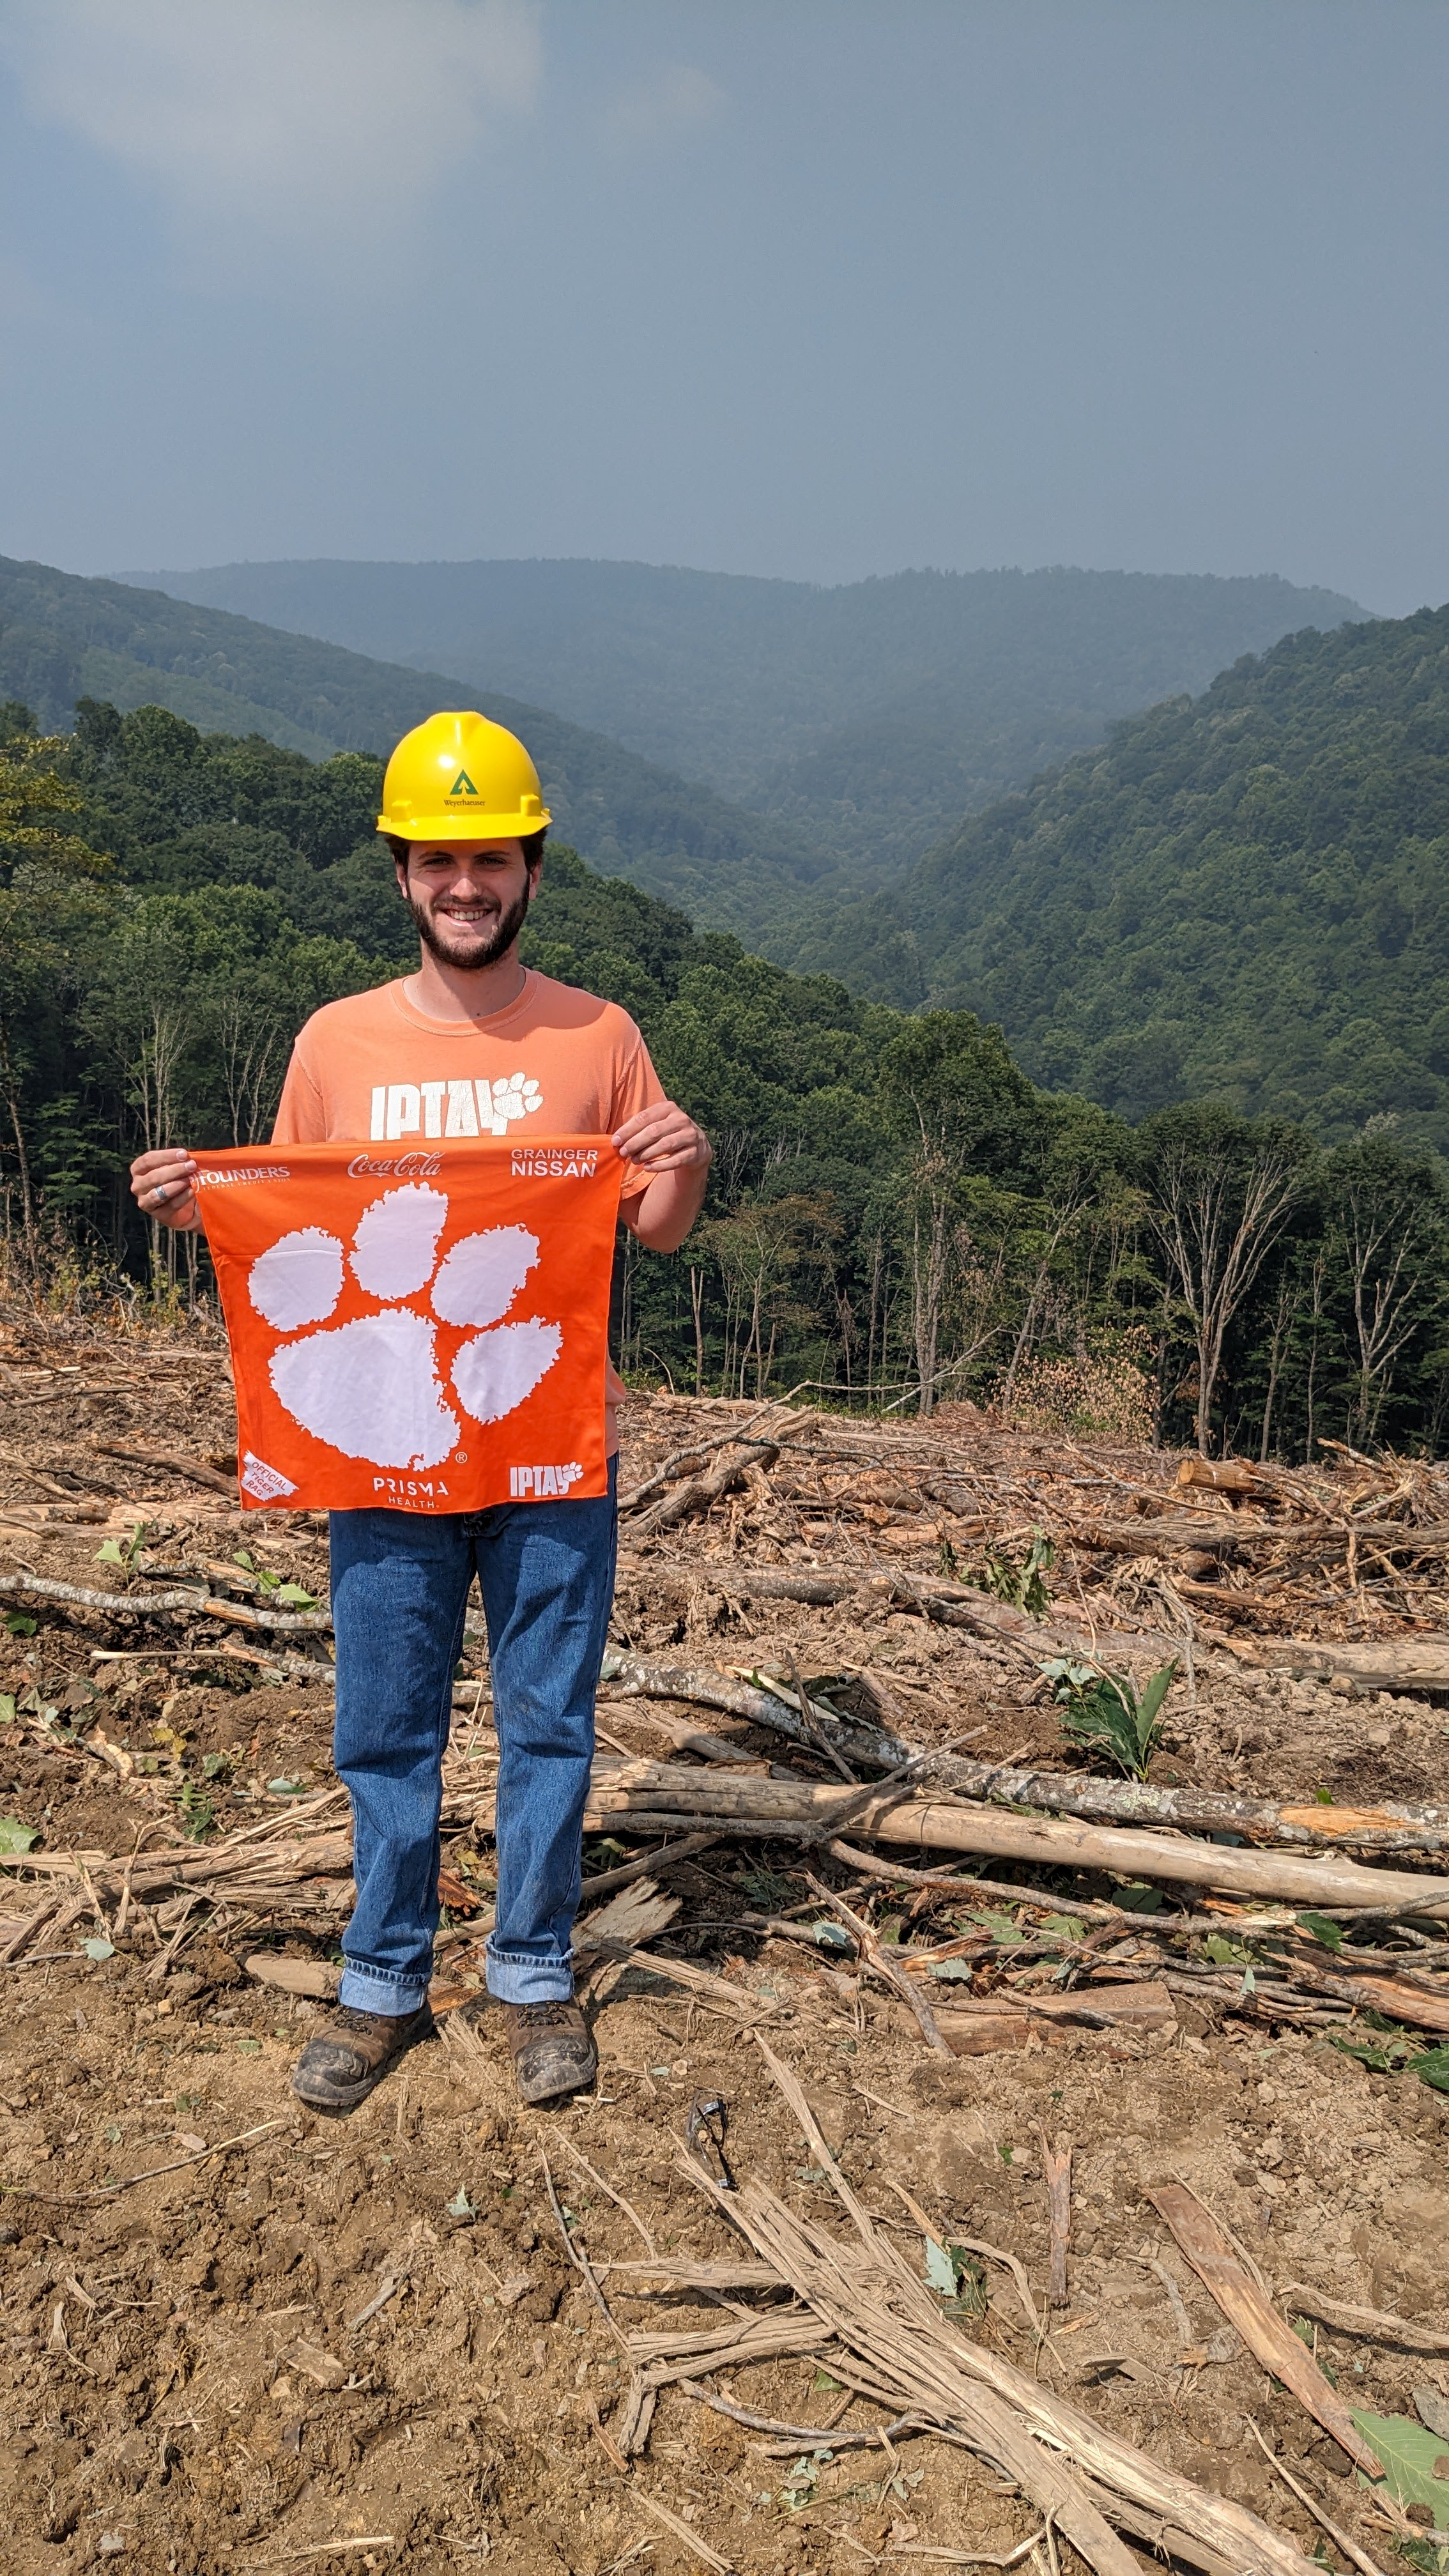 Image of Christian holding a Clemson flag in our timberlands near Lewisburg, W.V.